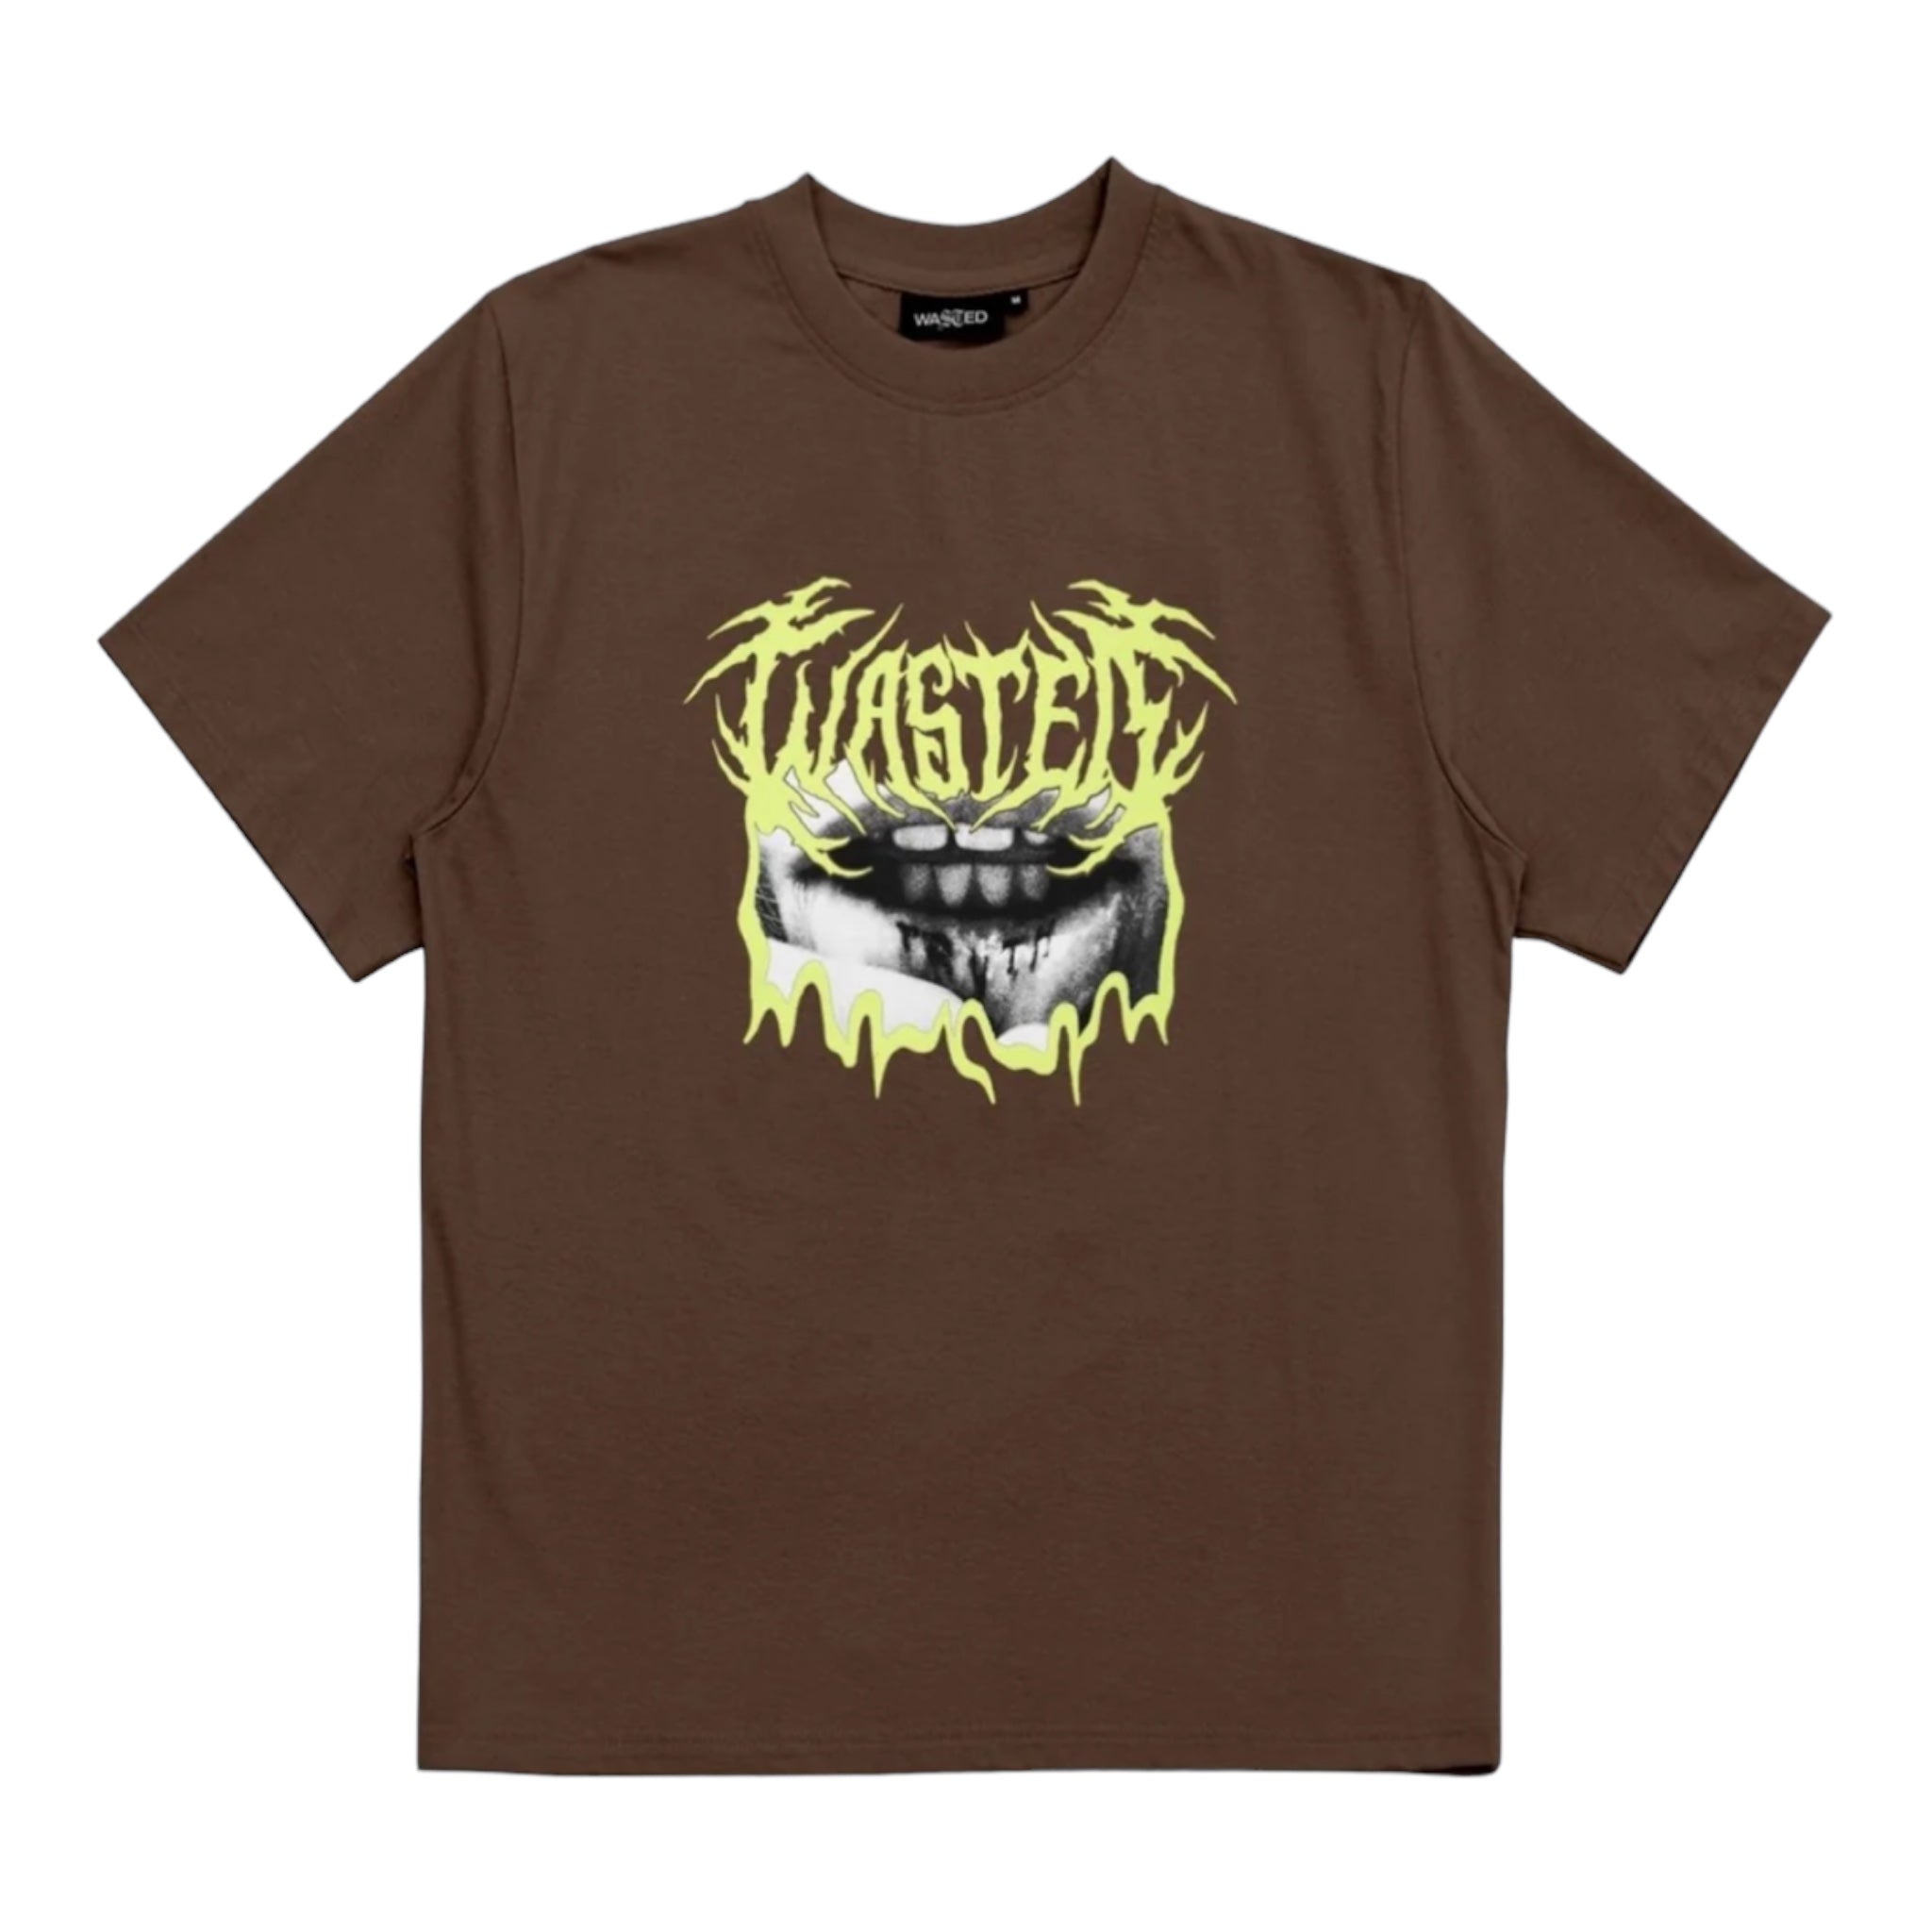 Roll T-Shirt Brown - Wasted Paris